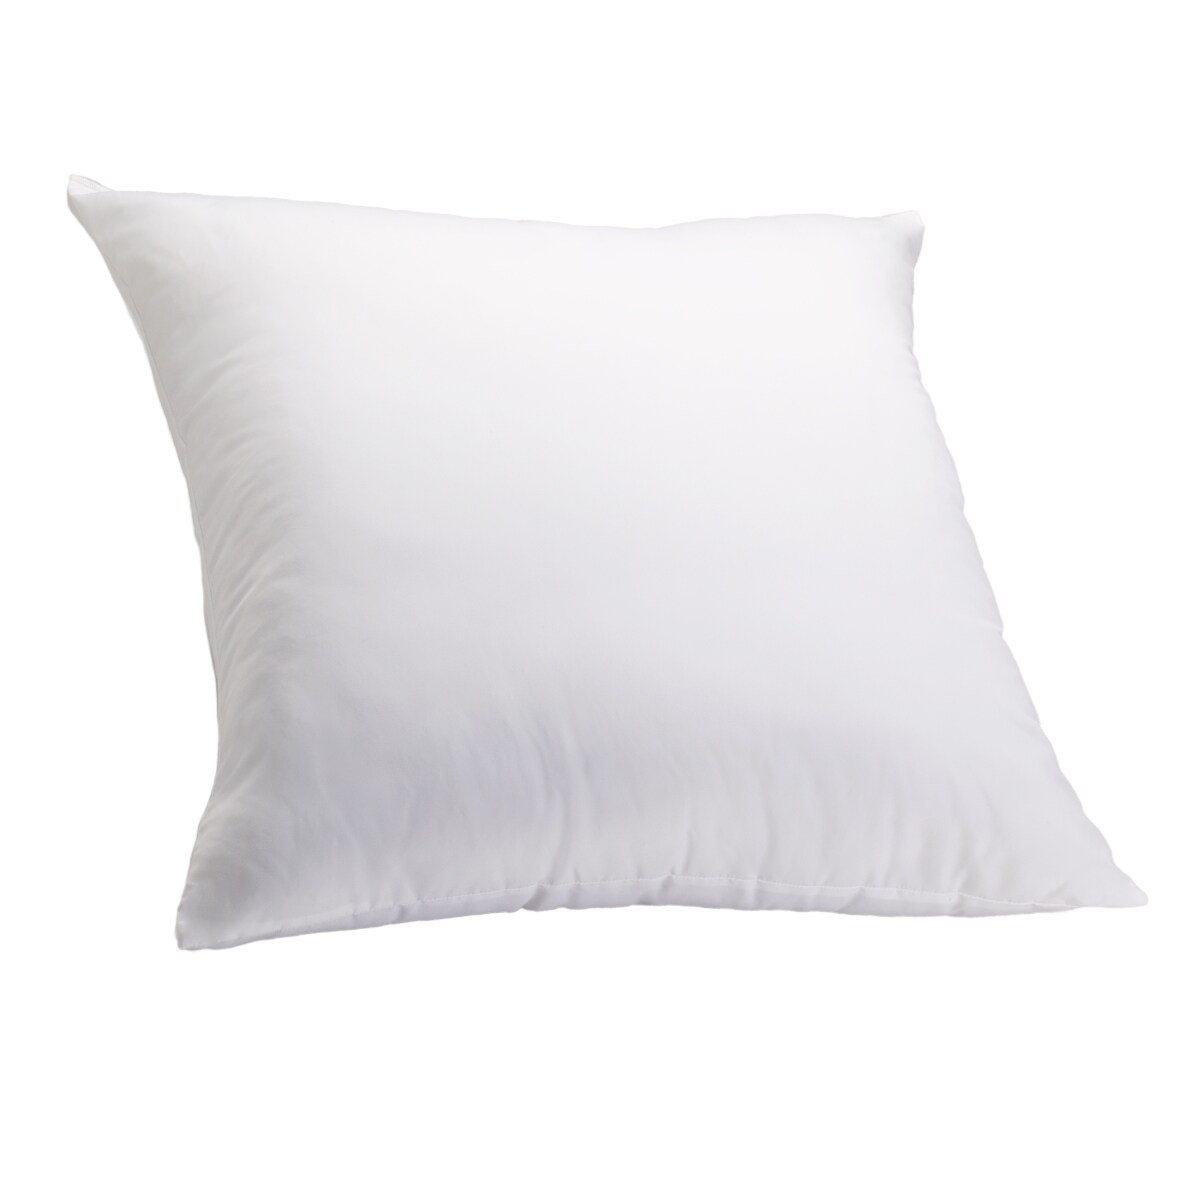 26" x 26" Cotton Hard Firm Compact Support Pillow Duck Feather 65cm x 65cm 